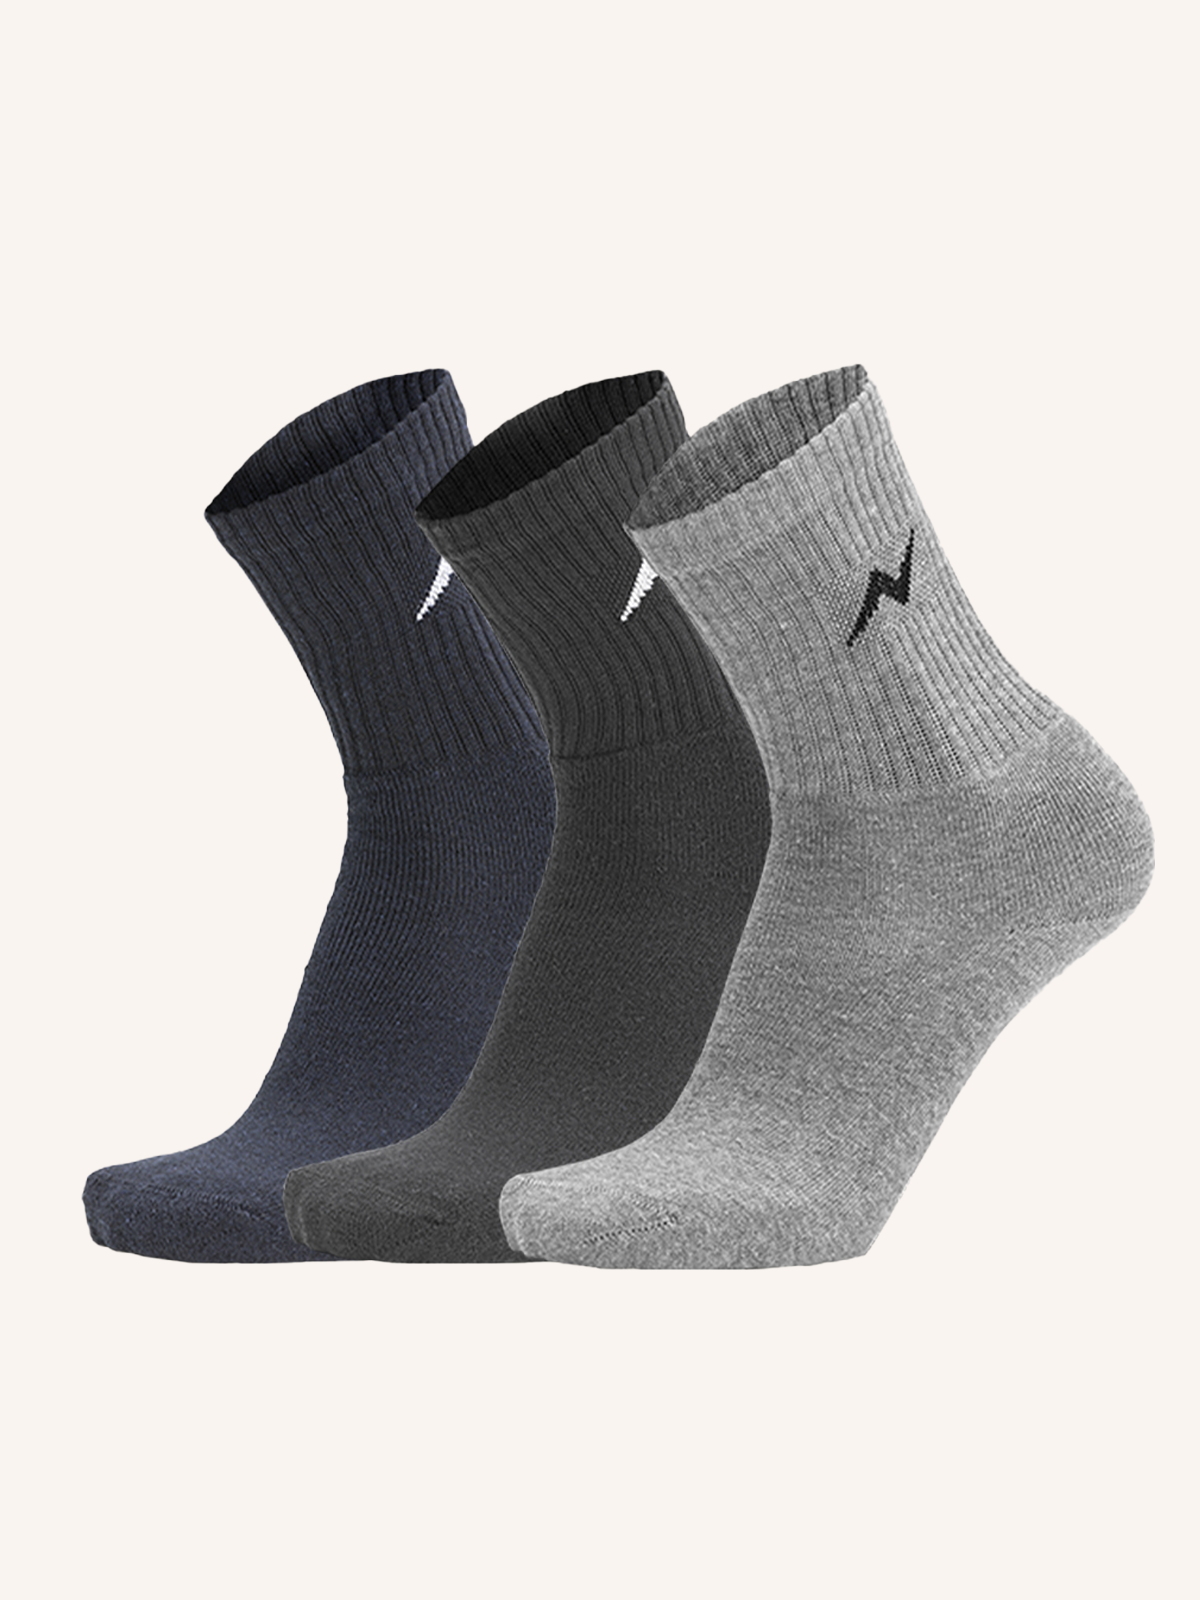 Short Sock in Variable Fabric for Men's Tennis | Plain Color | Pack of 3 Pairs | PRS 01